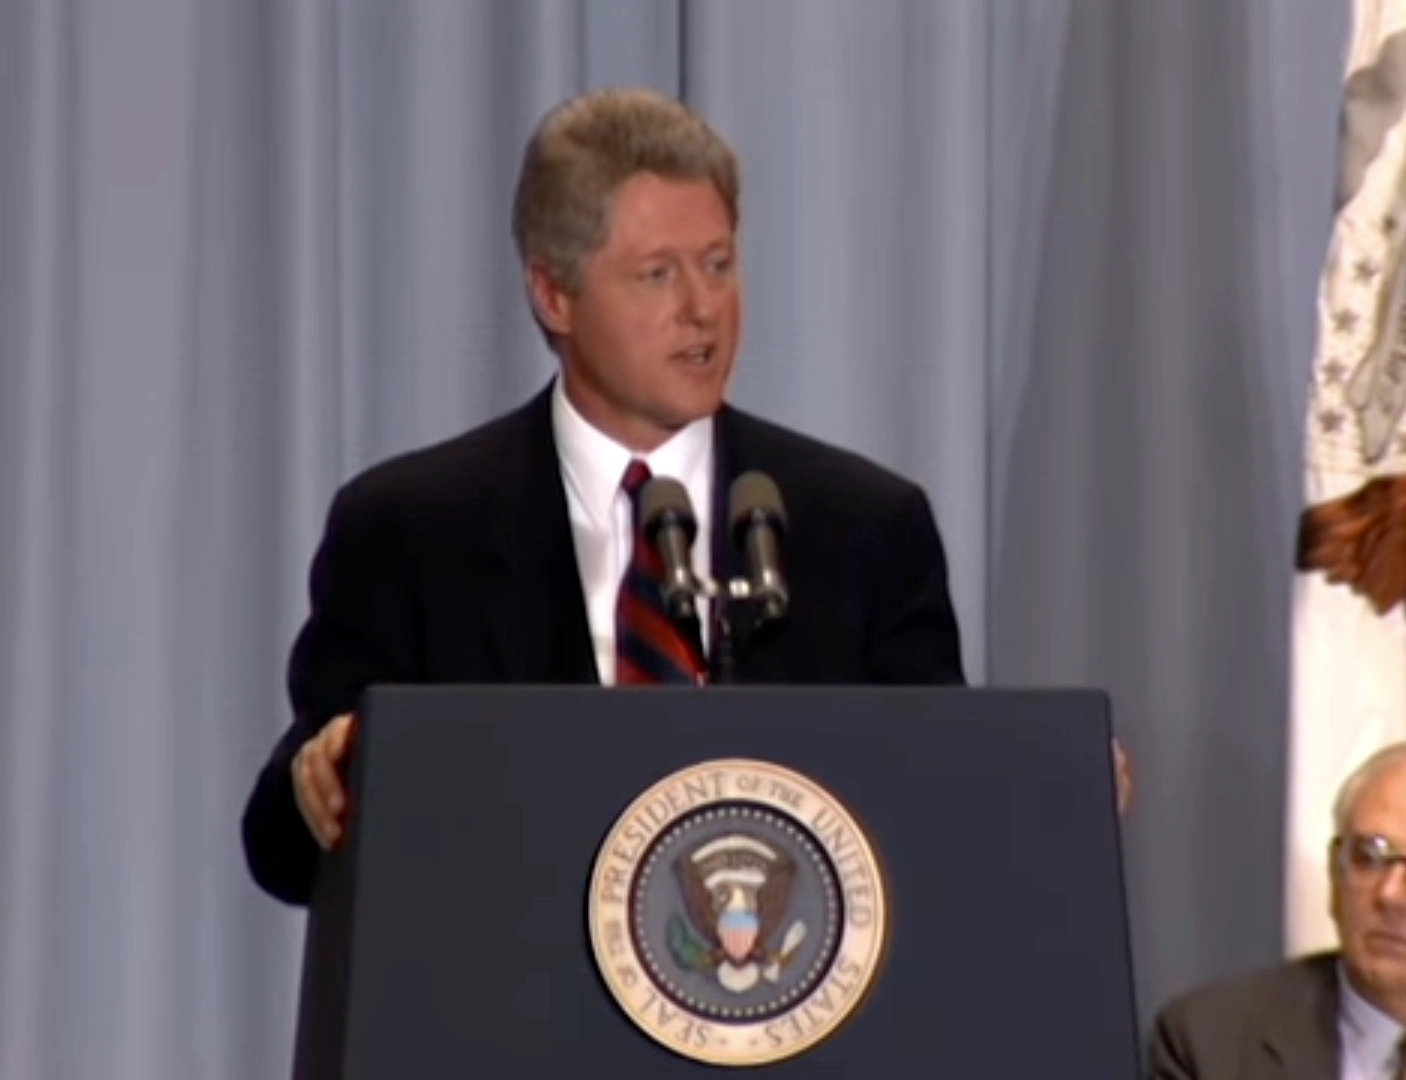 President Clinton announcing his new policy of don't ask don't tell.